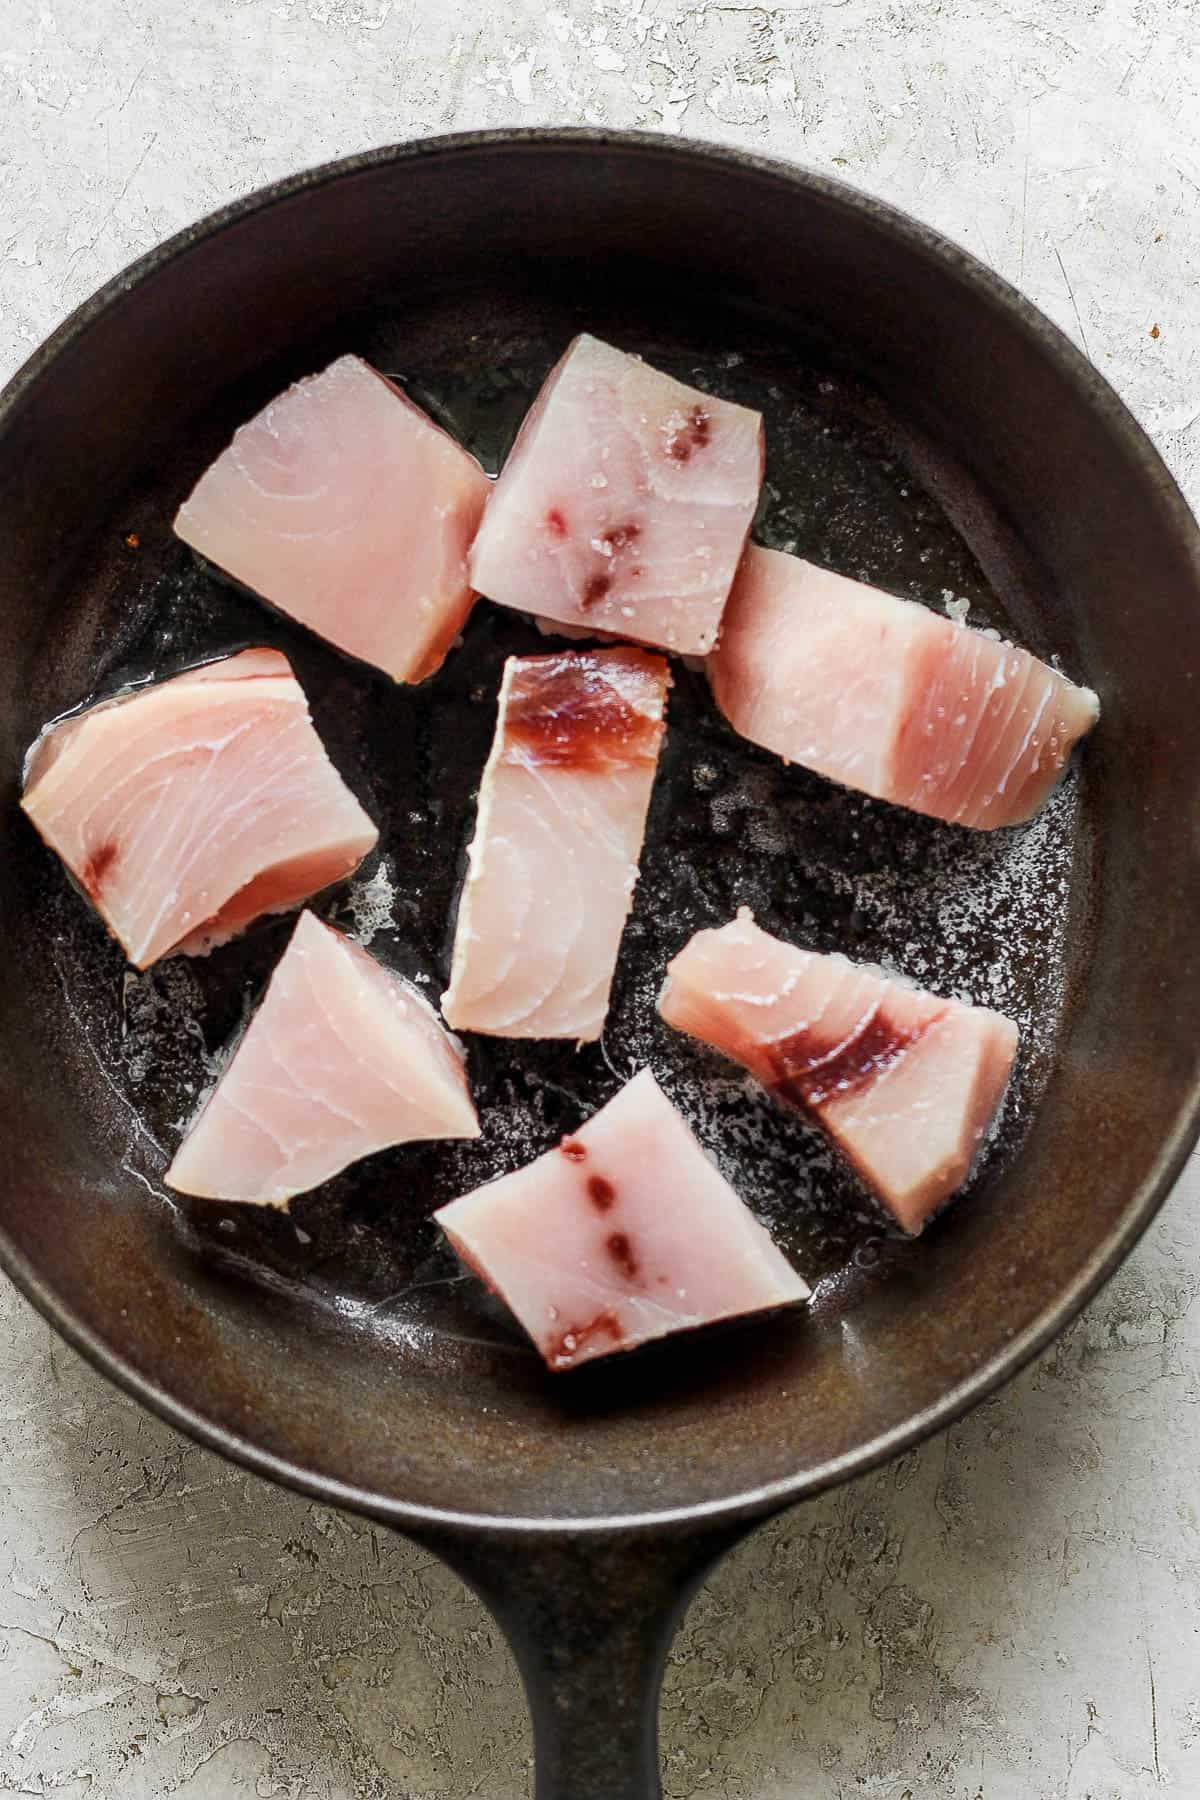 Large pieces of swordfish searing in a cast iron skillet.